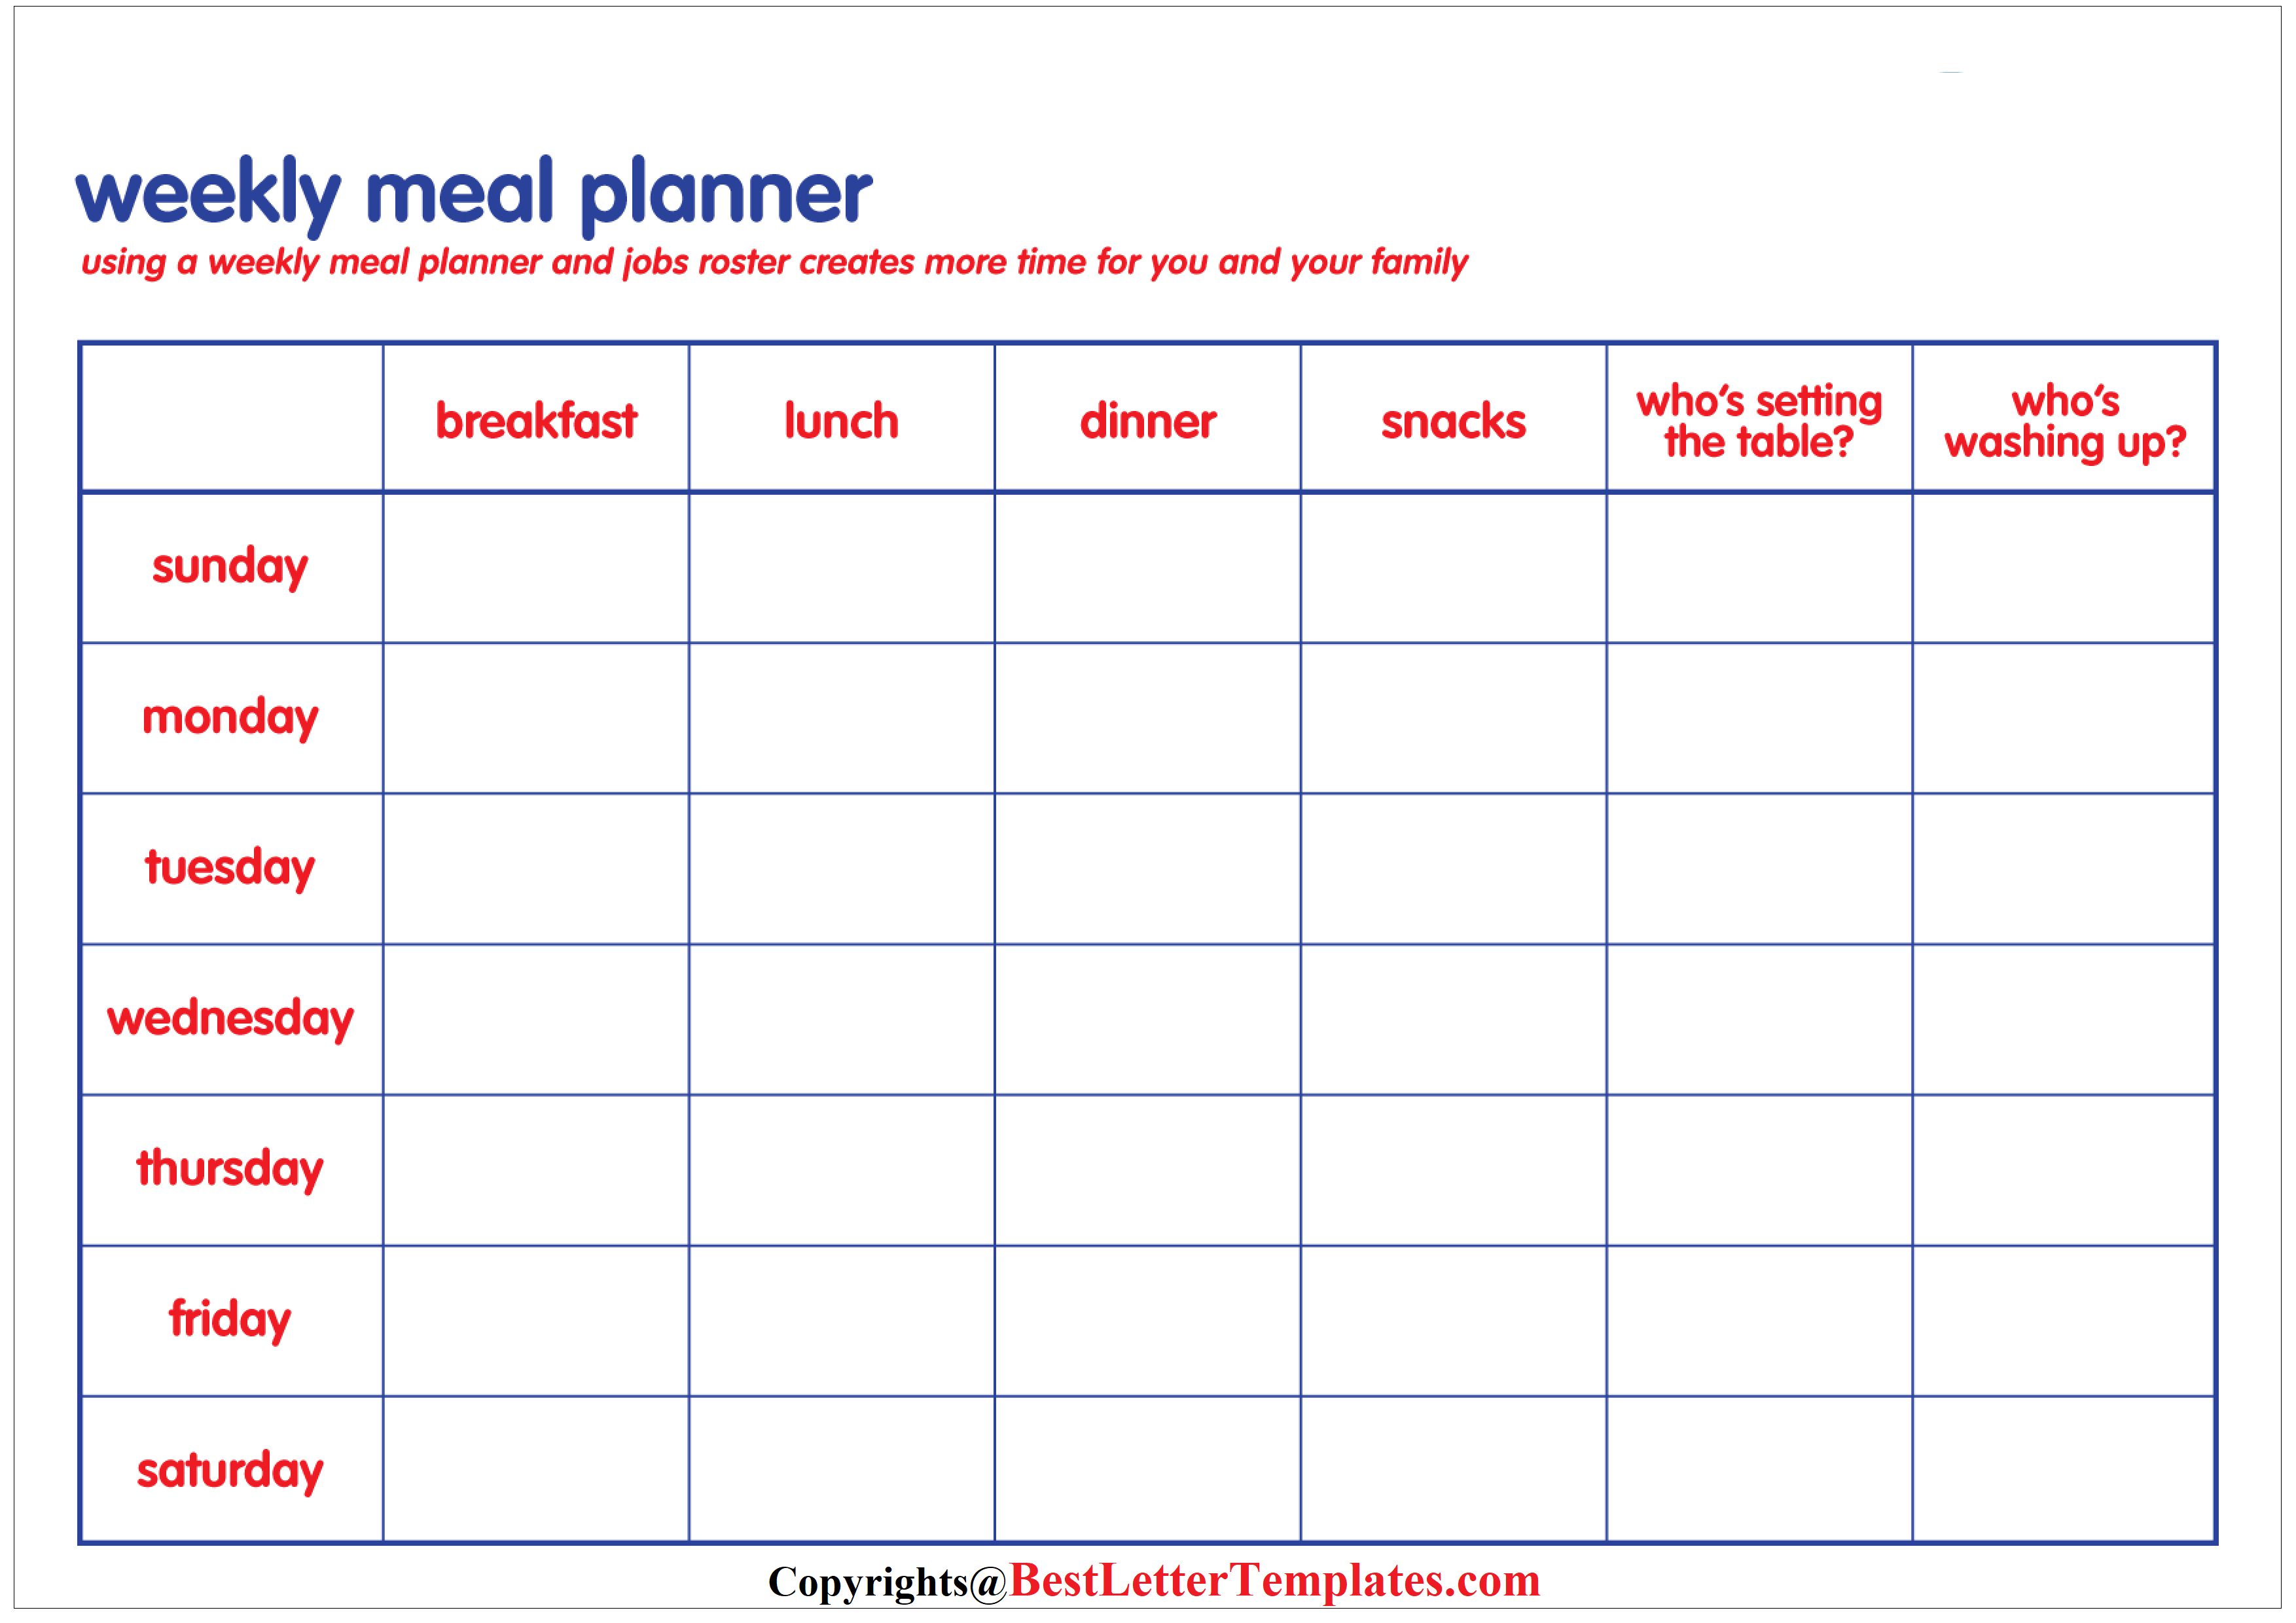 Weekly Meal Planner For A Family Of 4 Best Letter Templates